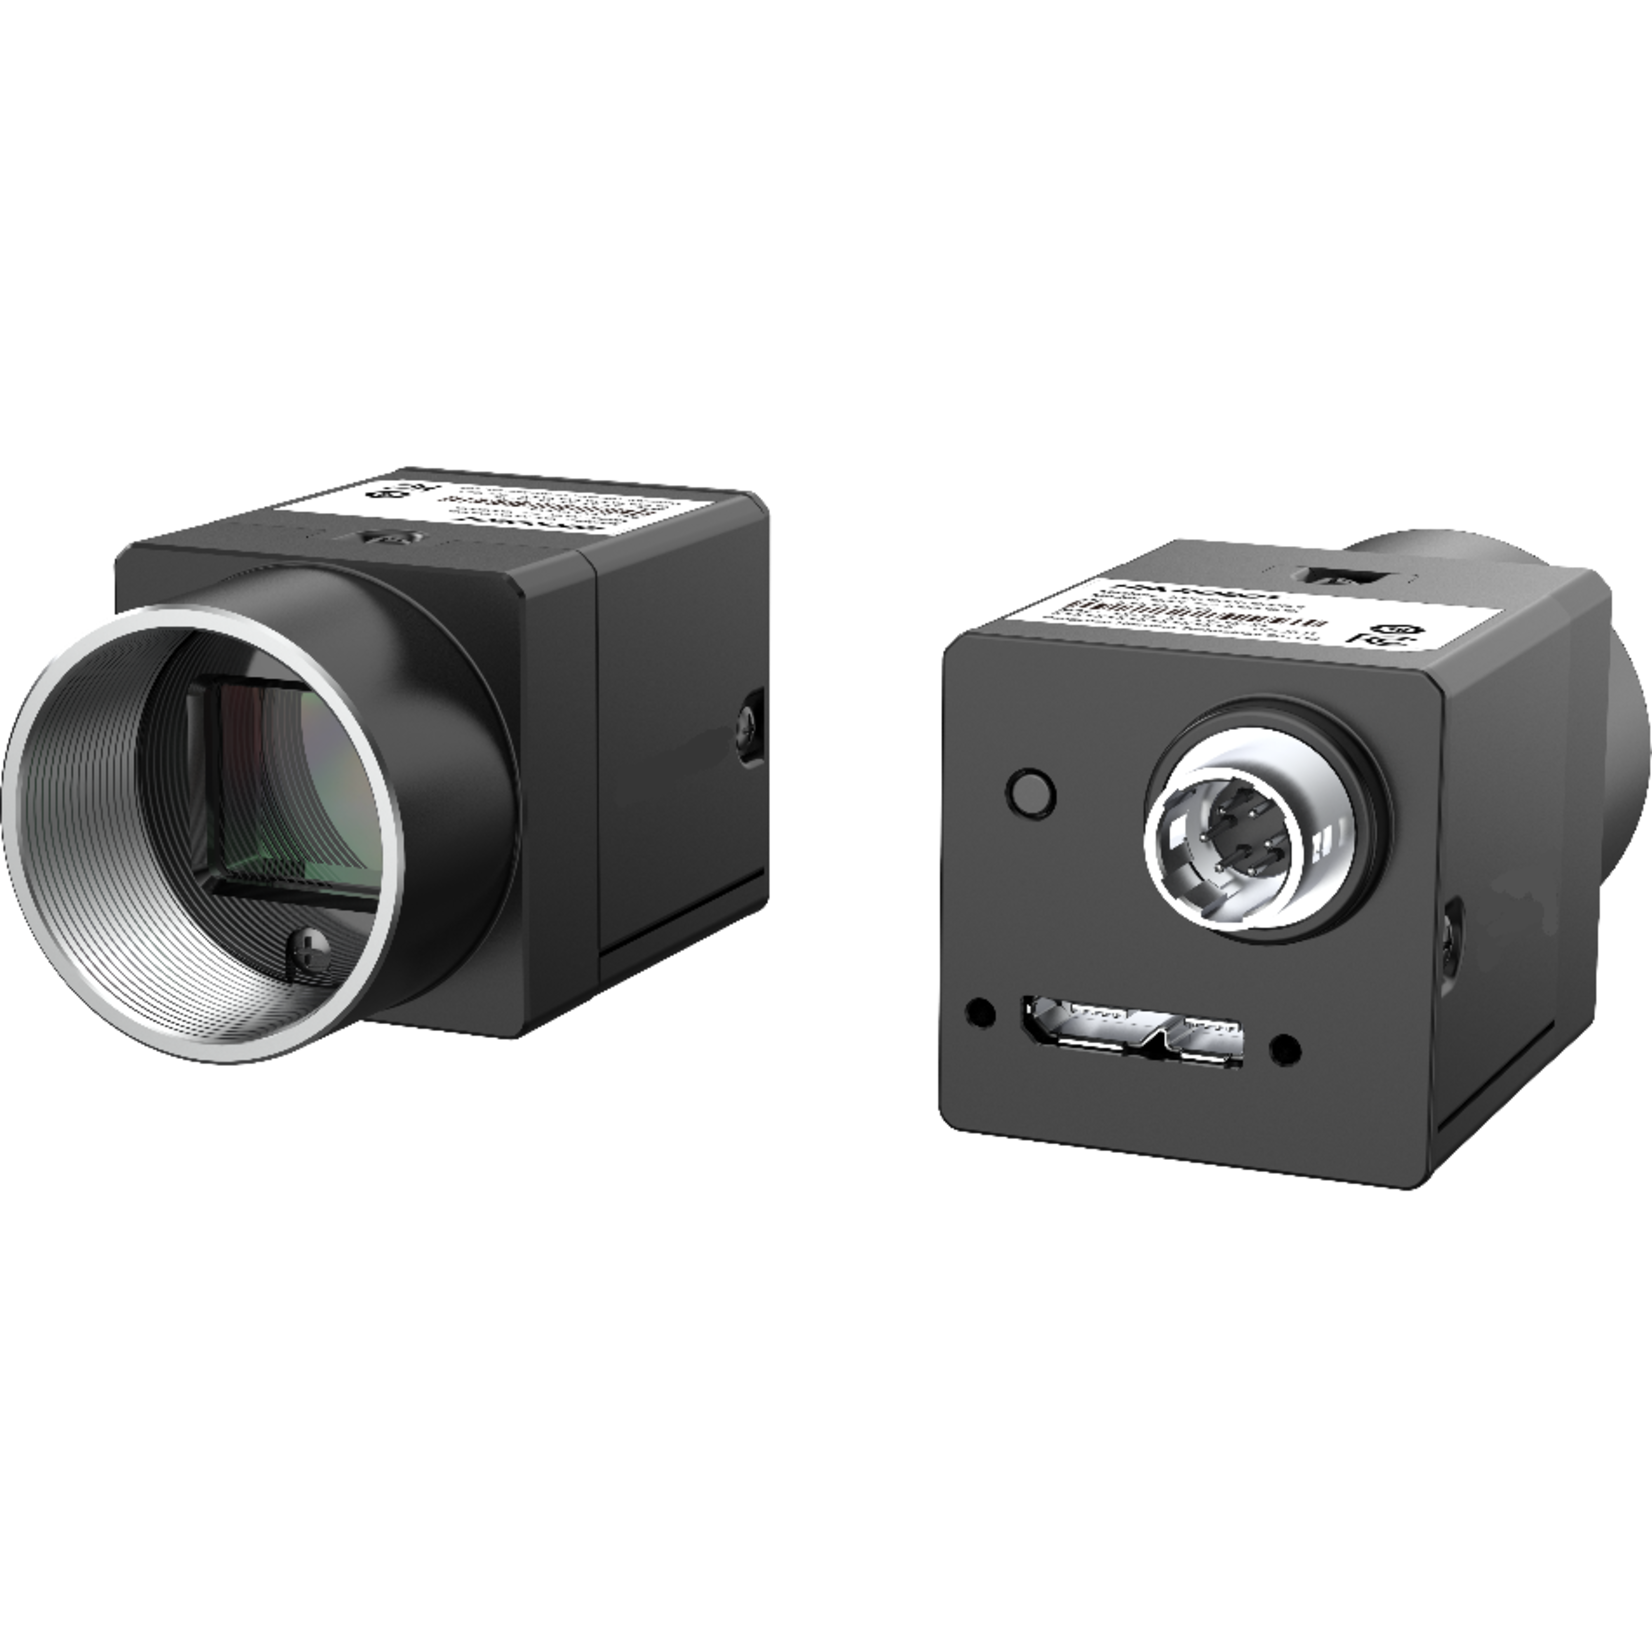 USB 3.0 cameras with activation for Metric measuring software